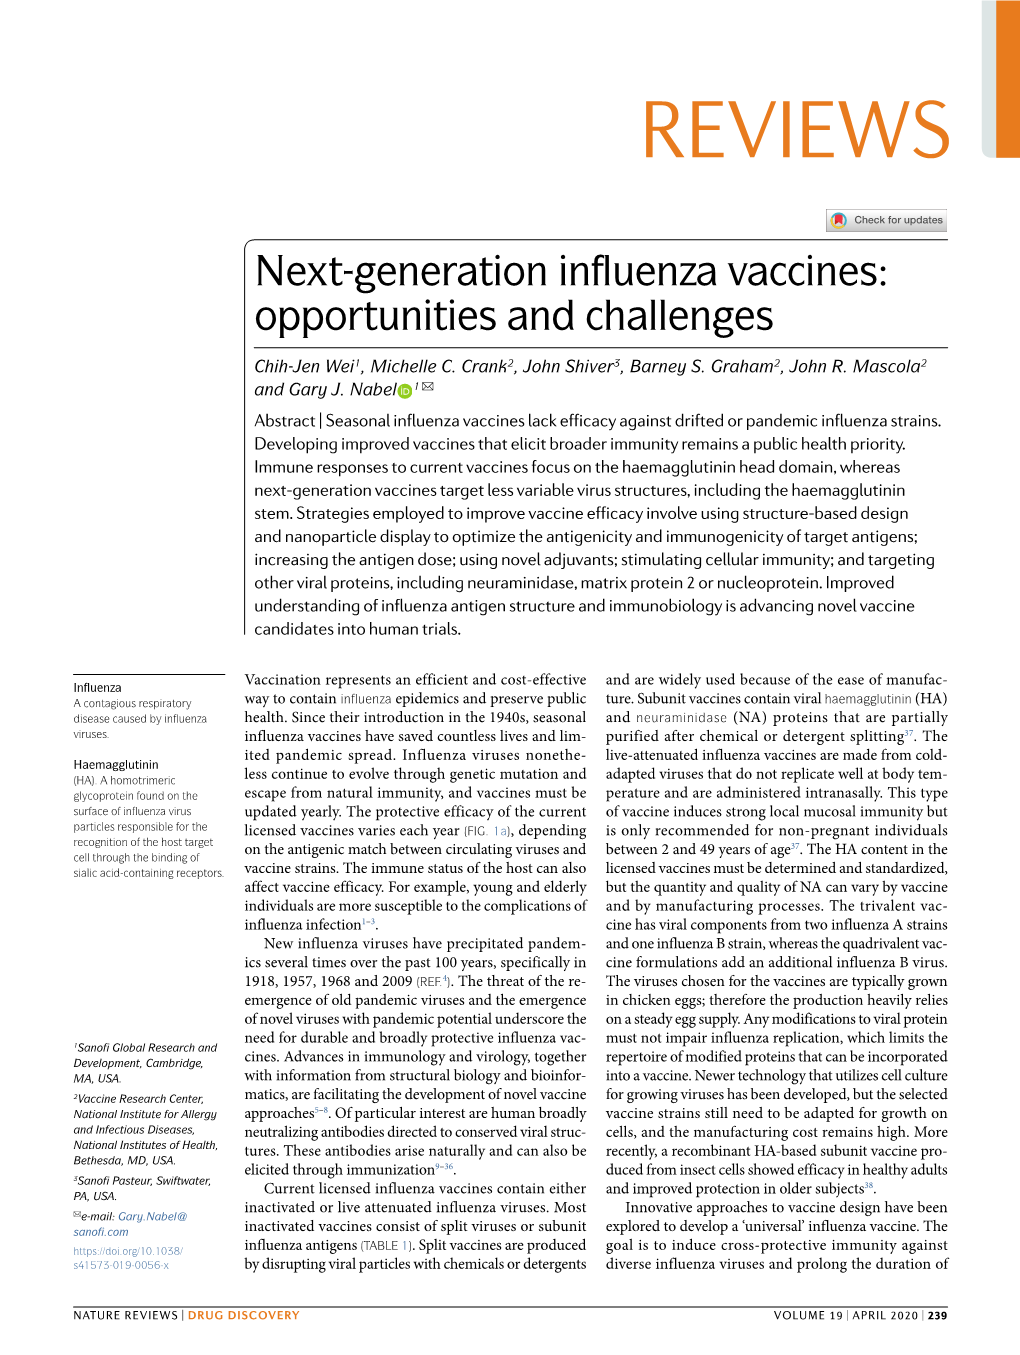 Next-Generation Influenza Vaccines: Opportunities and Challenges